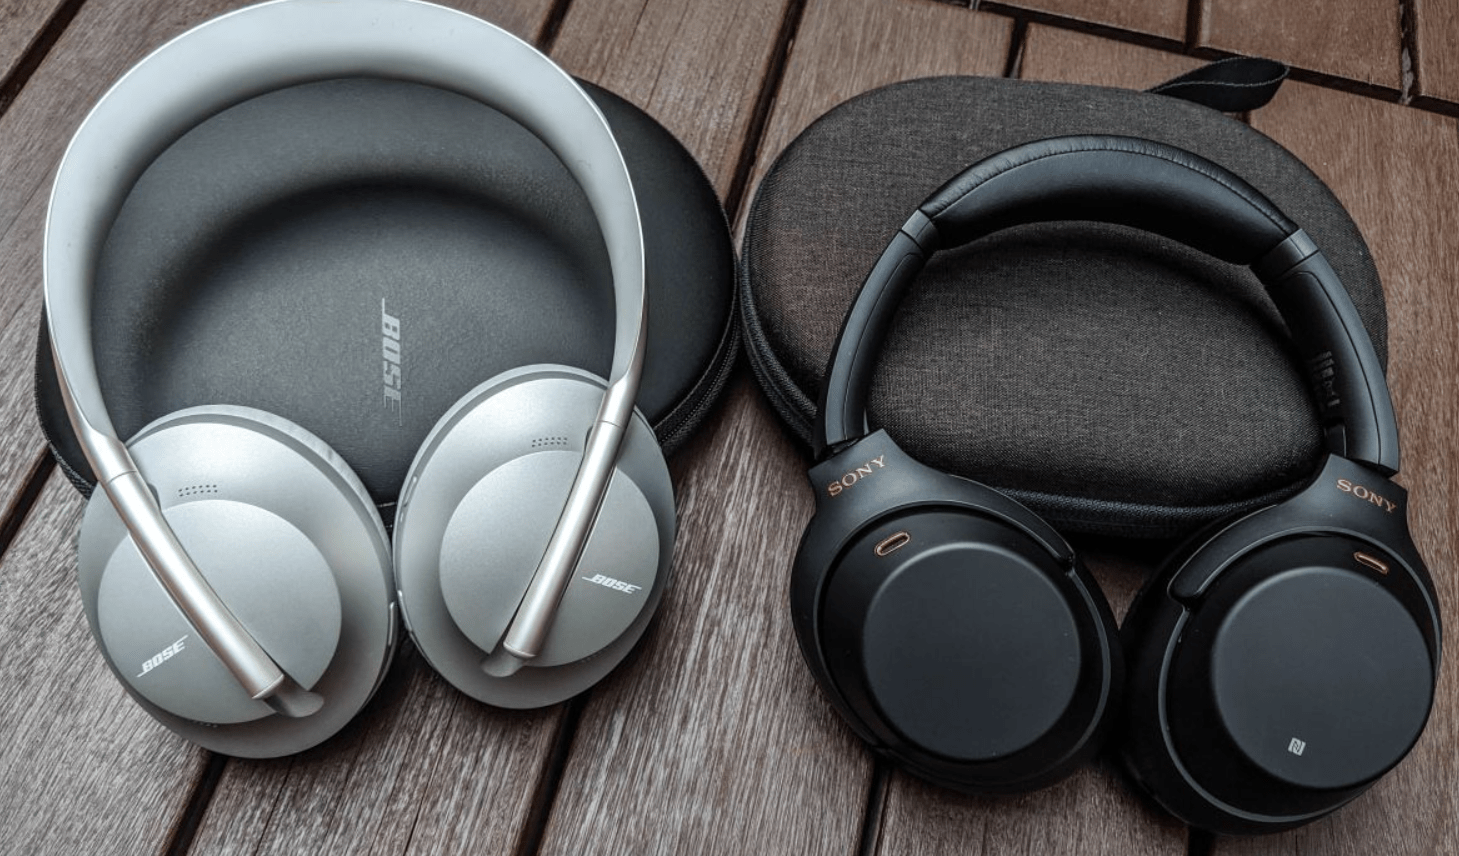 How To Connect Sony Bluetooth Headphones